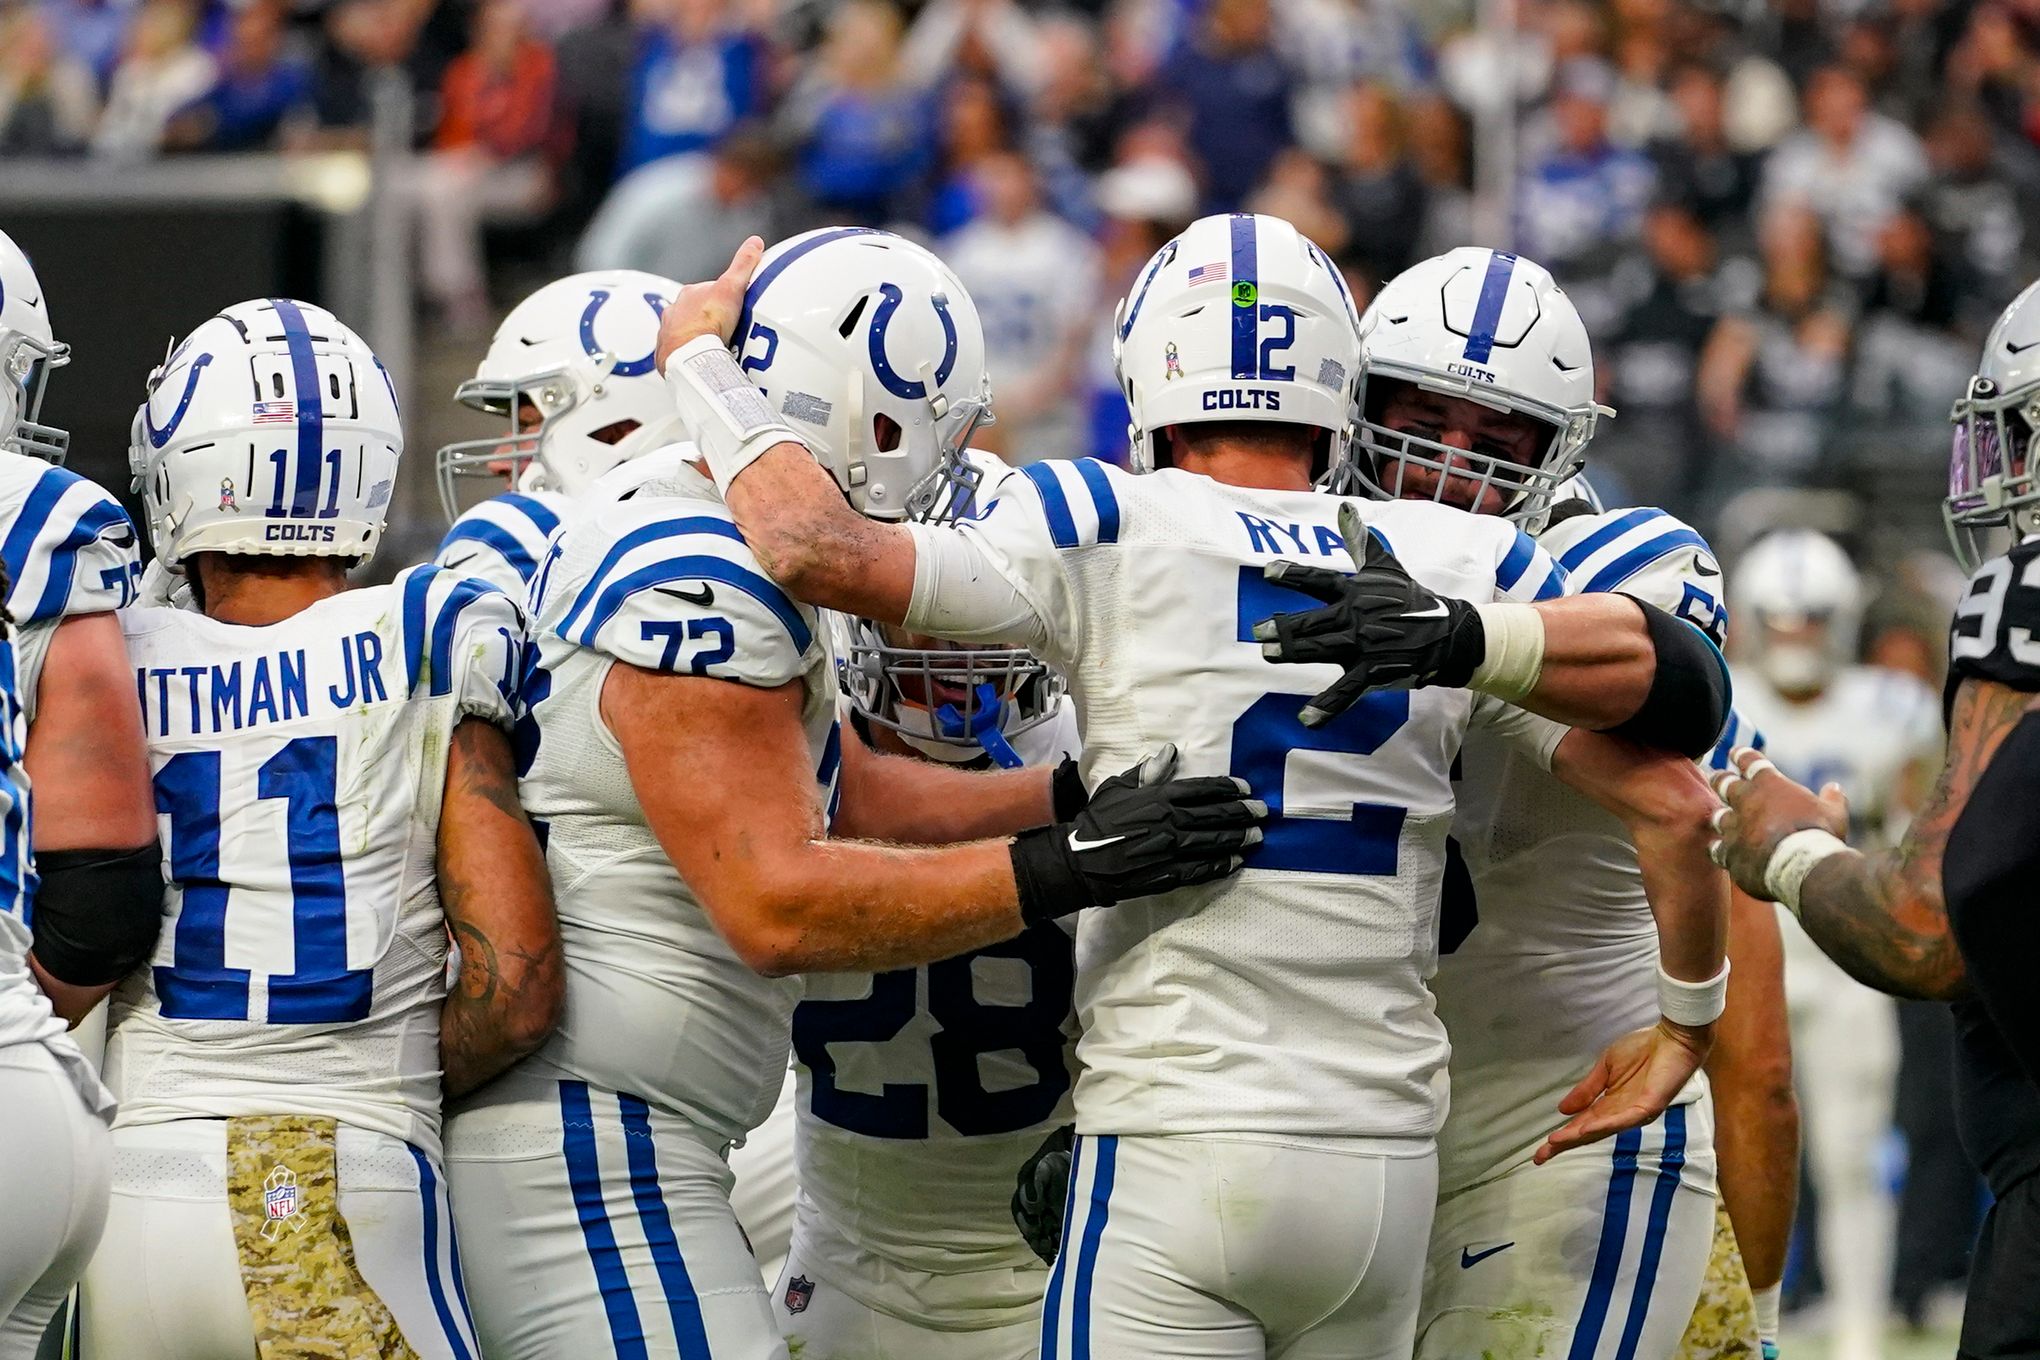 Colts hope emotional win helps inspire 2nd half charge